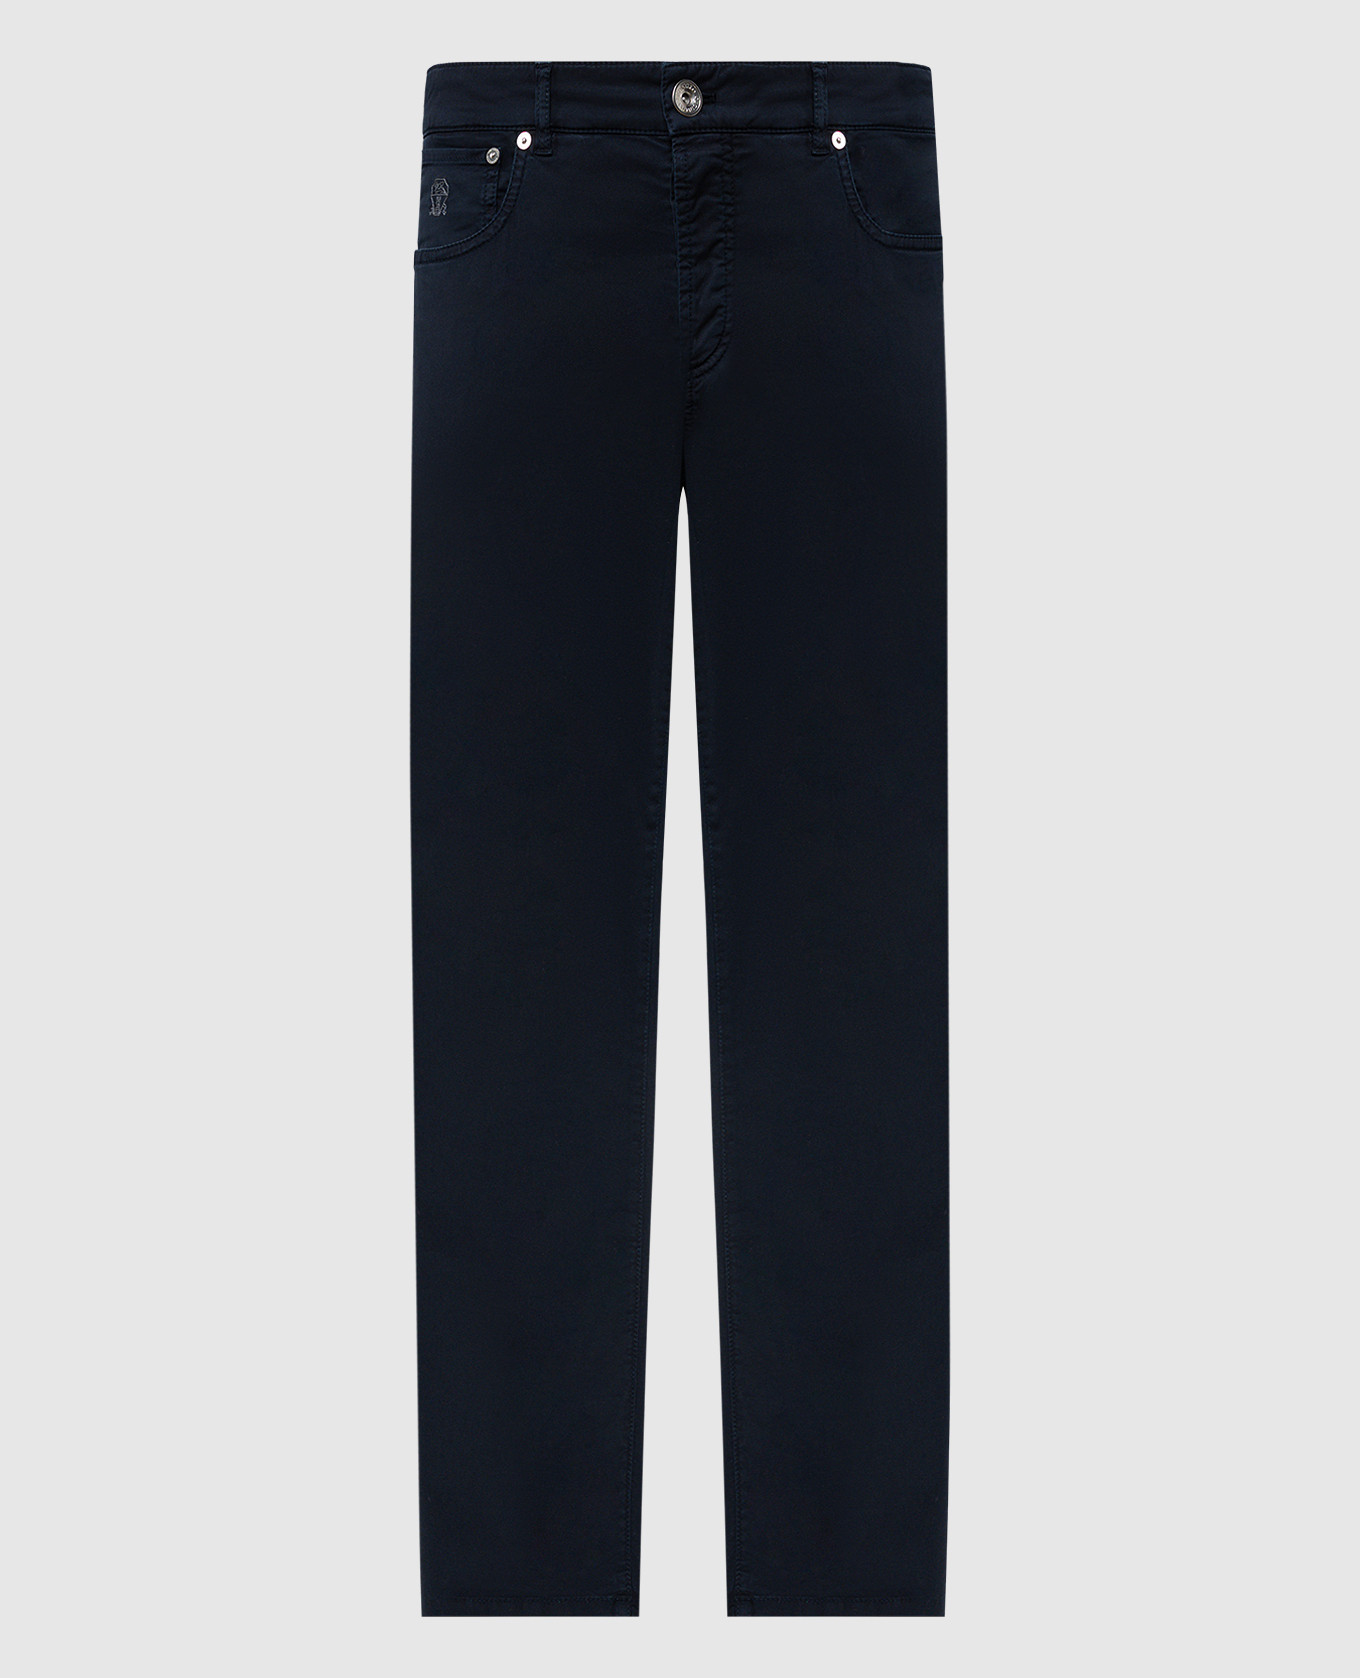 Blue chinos with logo emblem embroidery